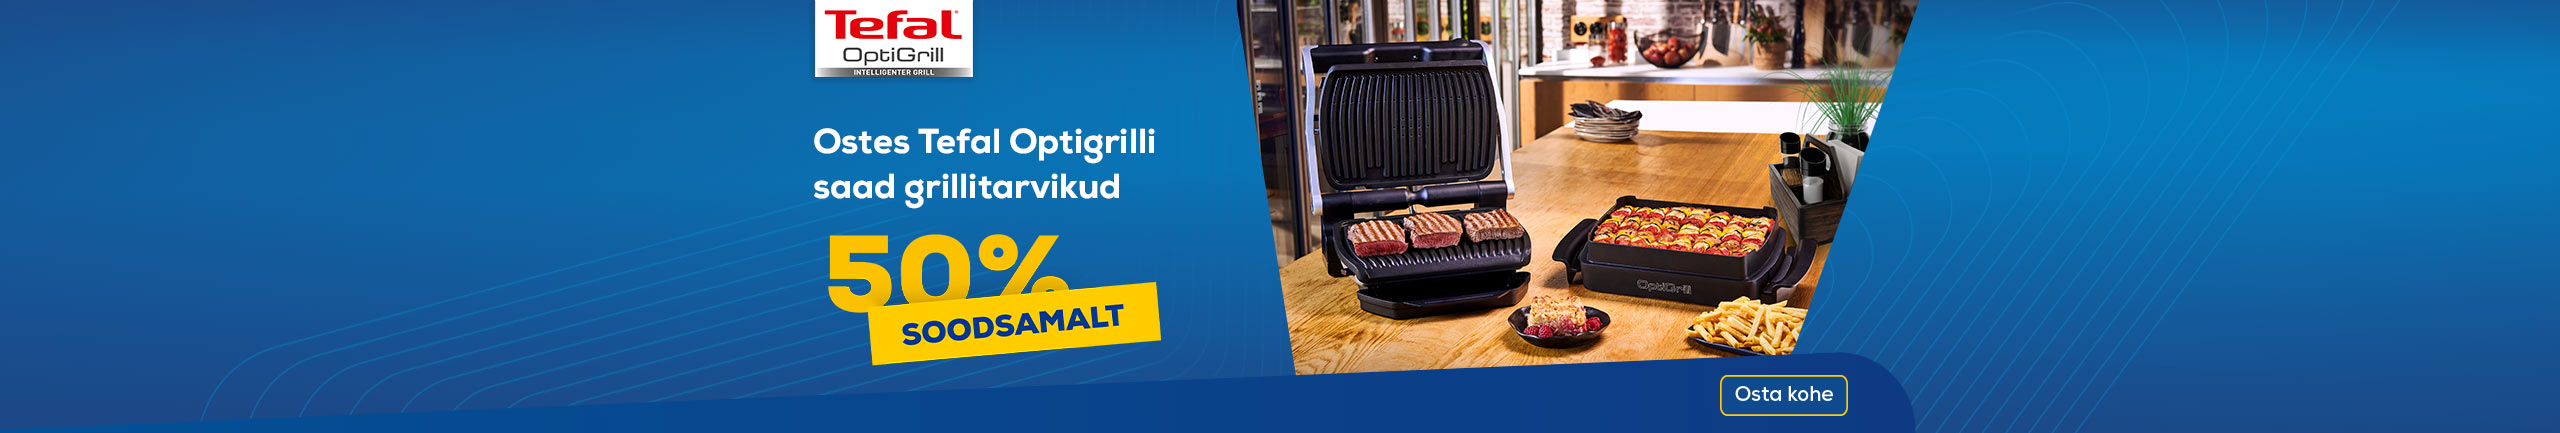 Buy Tefal Optigrill and receive grill accessories -50% 